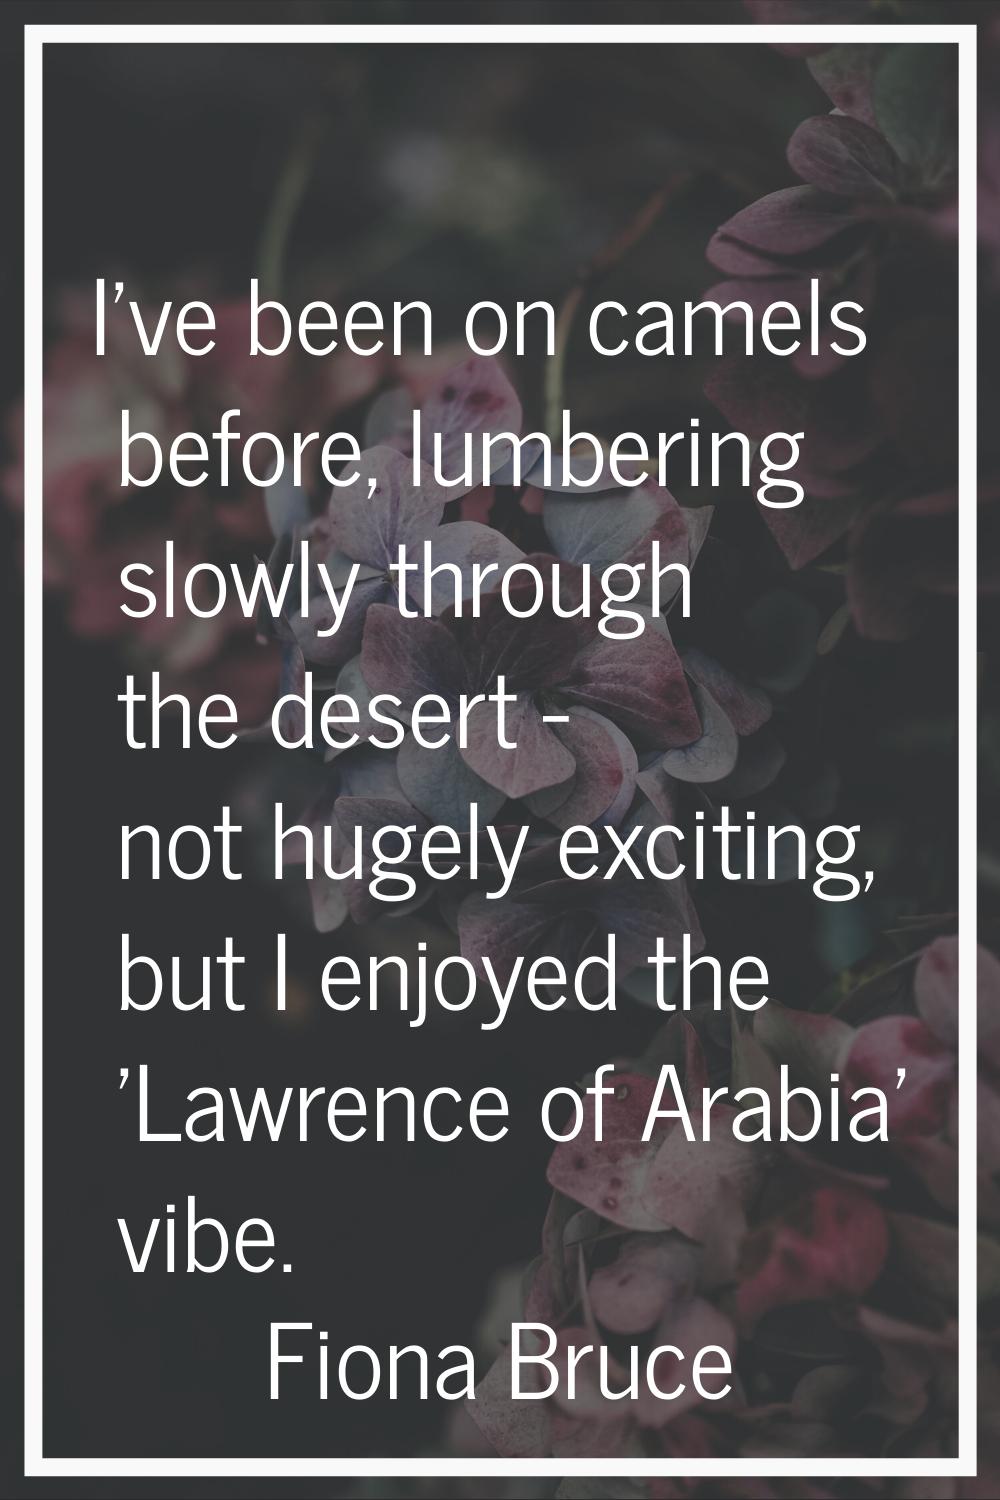 I've been on camels before, lumbering slowly through the desert - not hugely exciting, but I enjoye